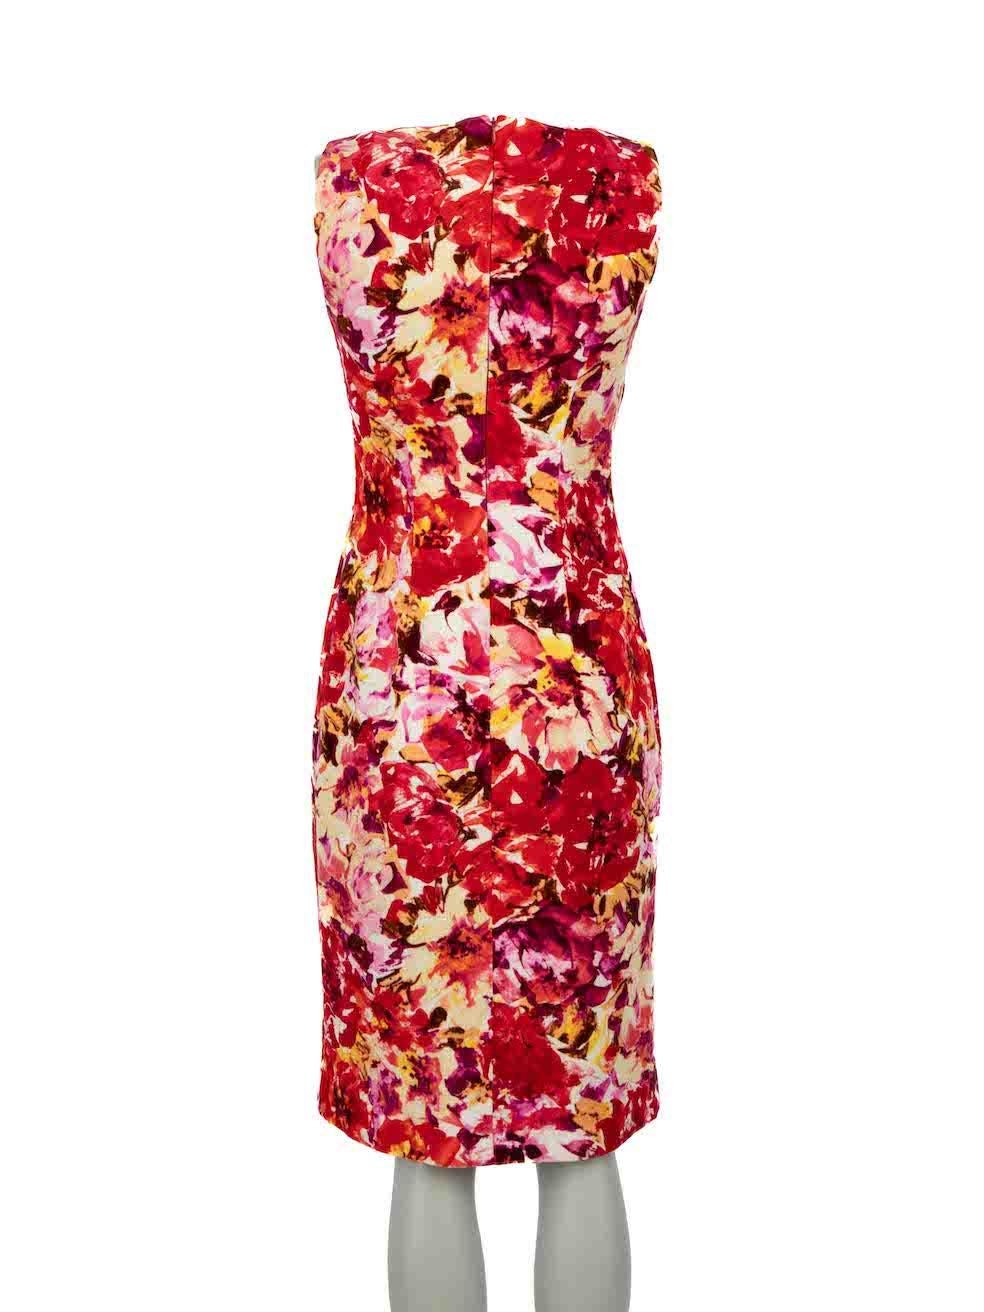 Moschino Red Velvet Floral Sleeveless Midi Dress Size S In Good Condition For Sale In London, GB